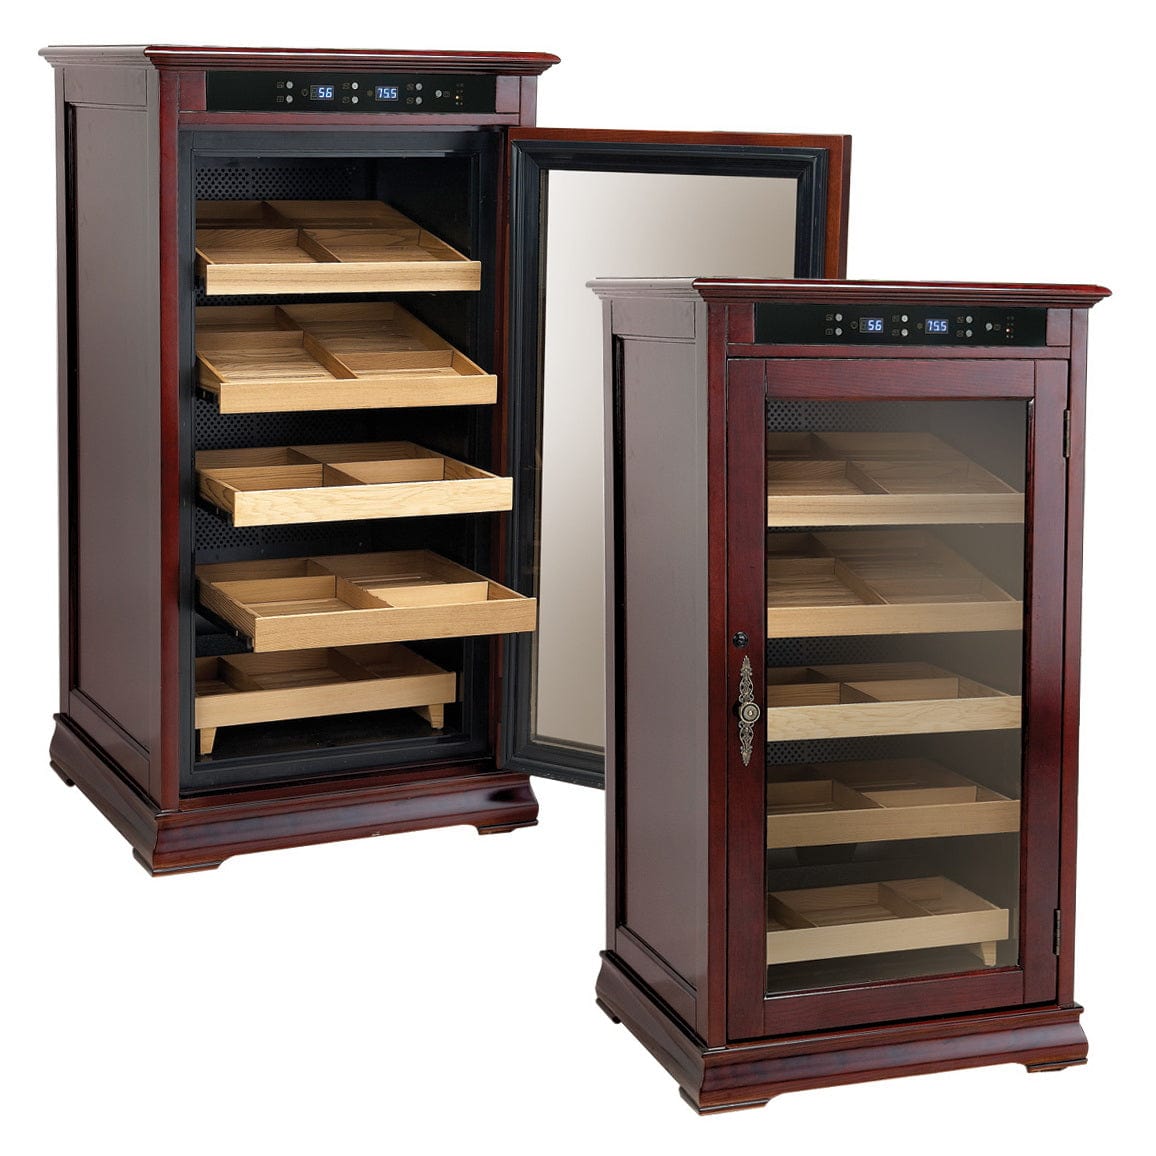 The Redford Electronic Cabinet Cigar Humidor Humidor Wine Coolers Empire